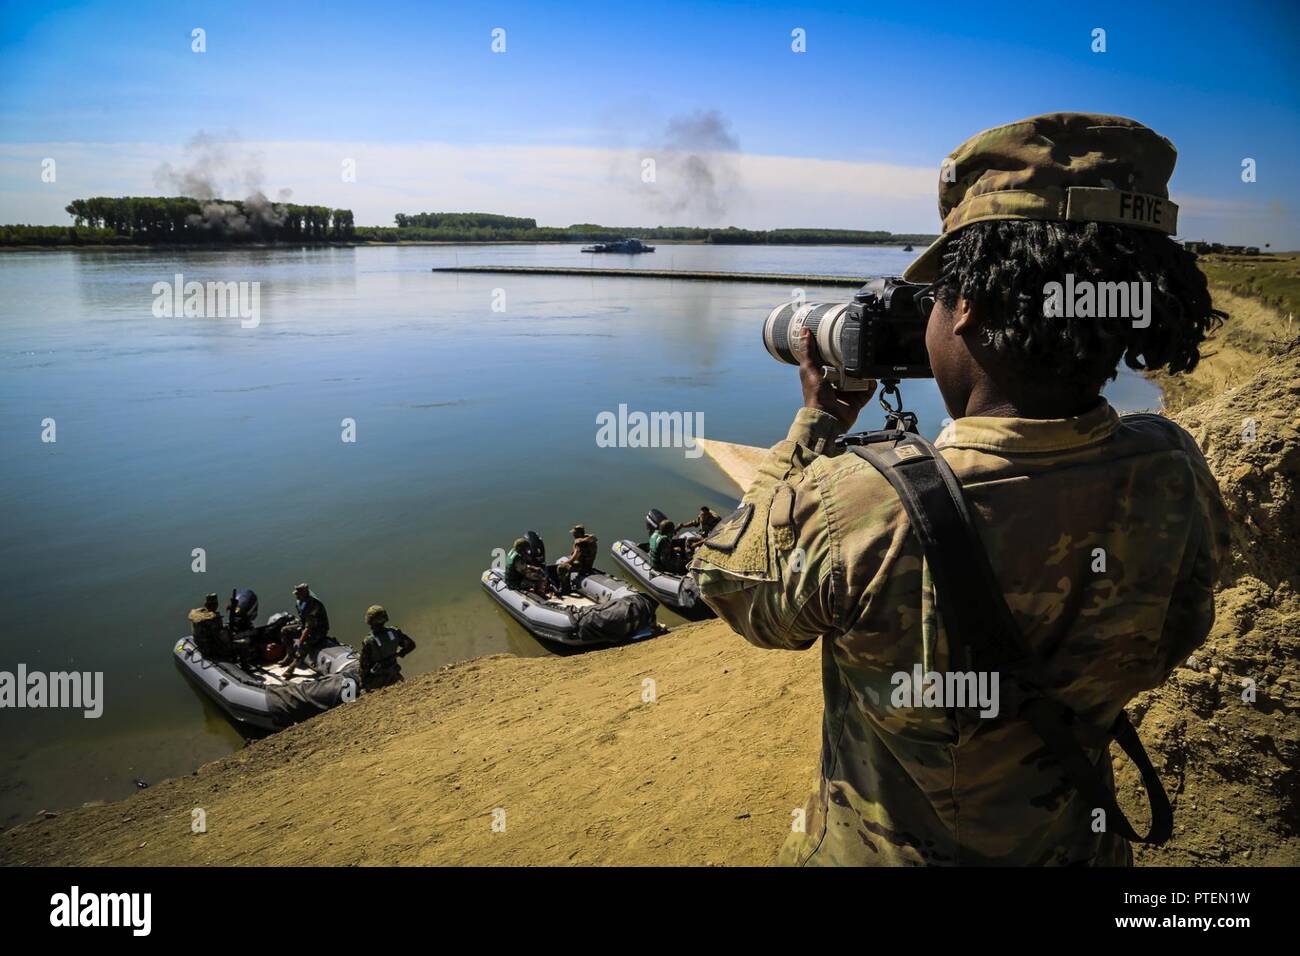 U.S. Army Private First Class Shekinah Frye, photographer assigned to 55th Signal Company (Combat Camera), documents a river crossing exercise during Saber Guardian 17 over the Danube River, Bordusani, Romania, July 15, 2017. Saber Guardian is a U.S. Army Europe-led multinational exercise that spans across Bulgaria, Hungary and Romania with more than 25,000 service members from 22 allied and partner nations. Stock Photo